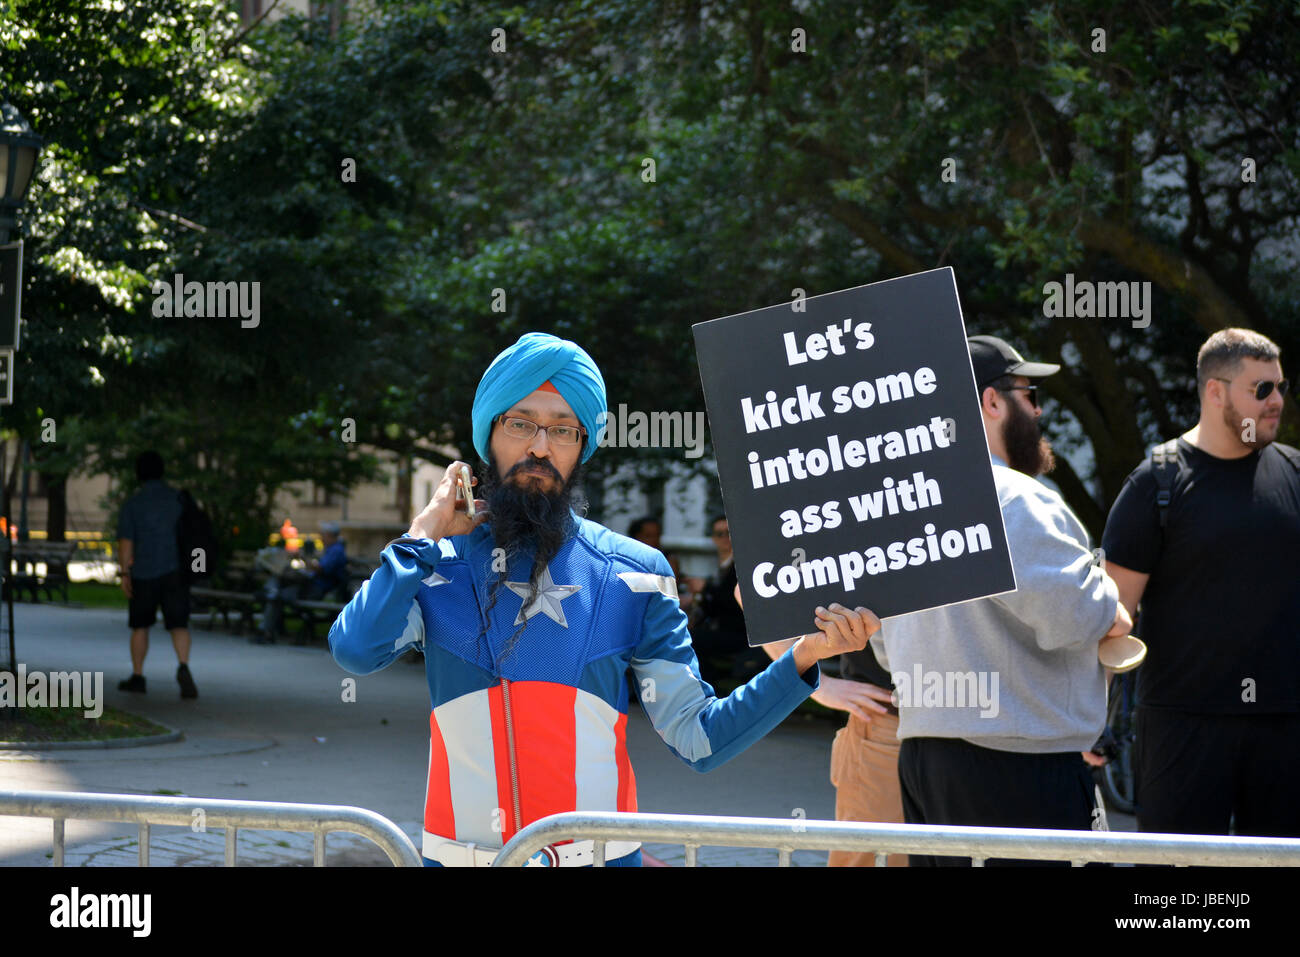 People holding signs supporting Islam at a counter protest to an anti-Sharia rally in New York City. Stock Photo